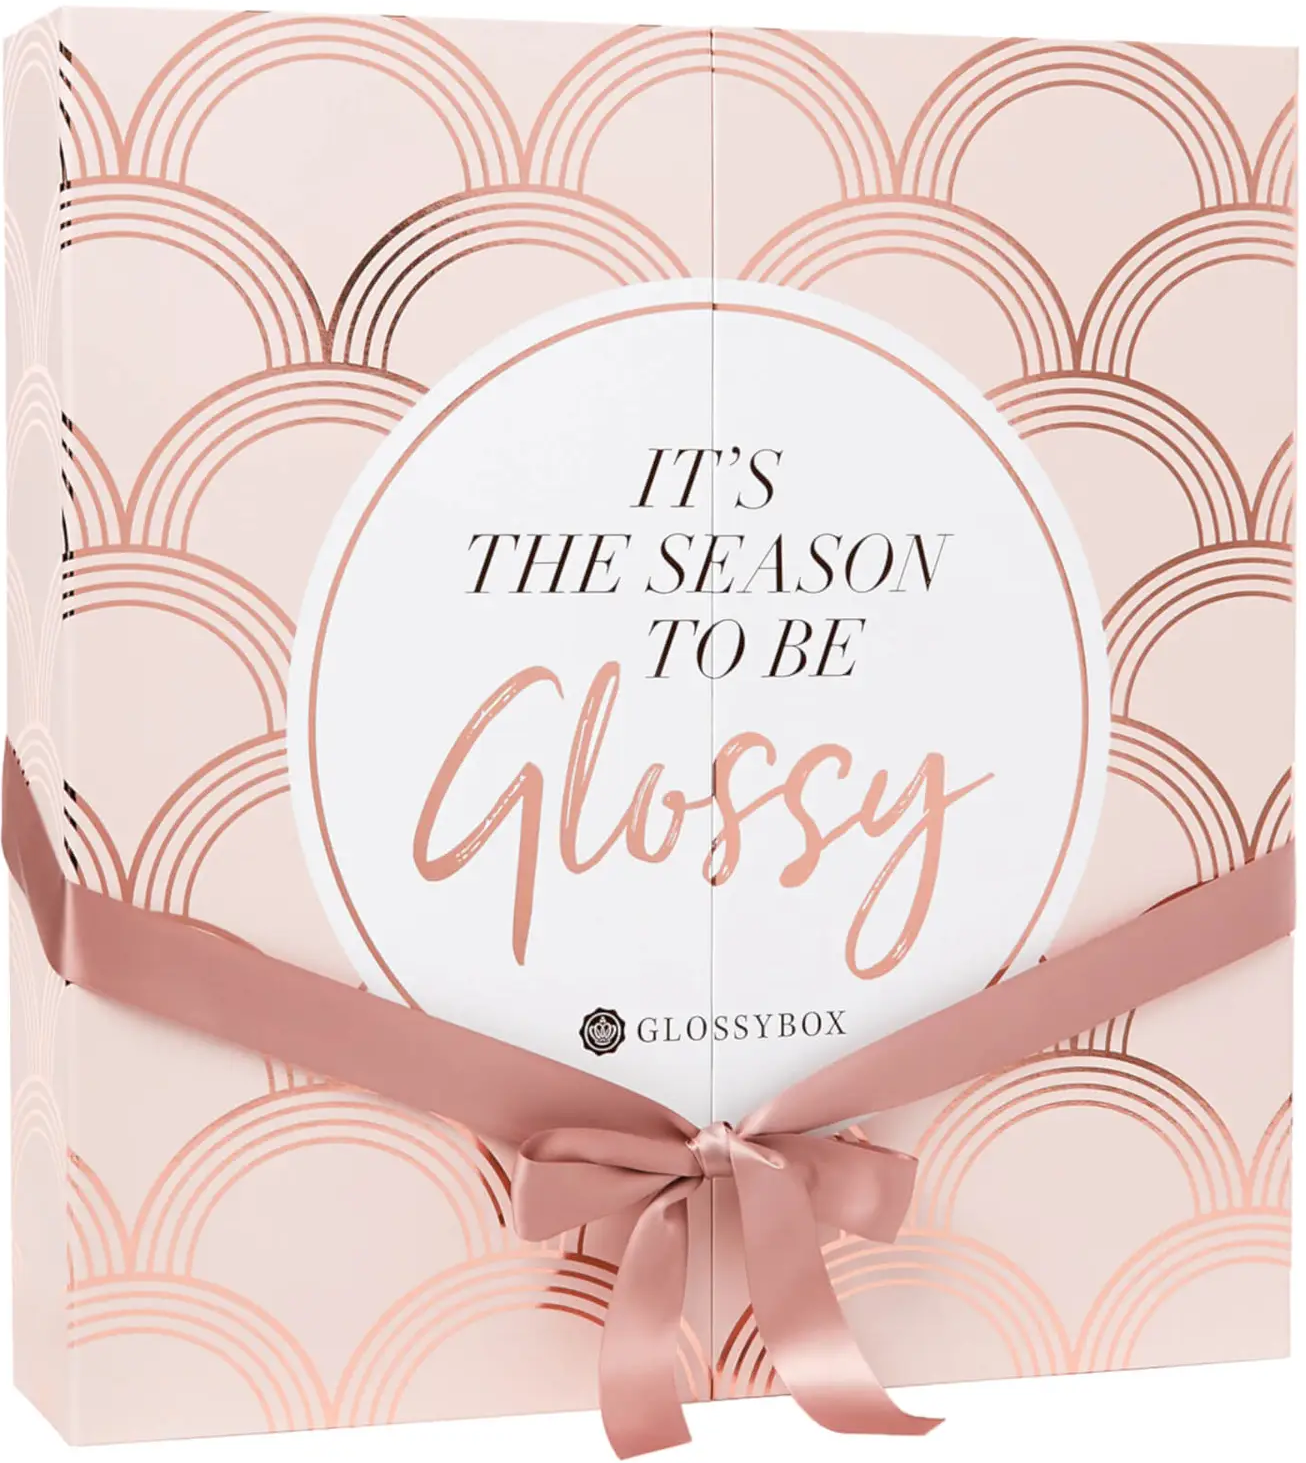 GLOSSYBOX 'It's the season to be Glossy' Advent Calendar Content (EN)